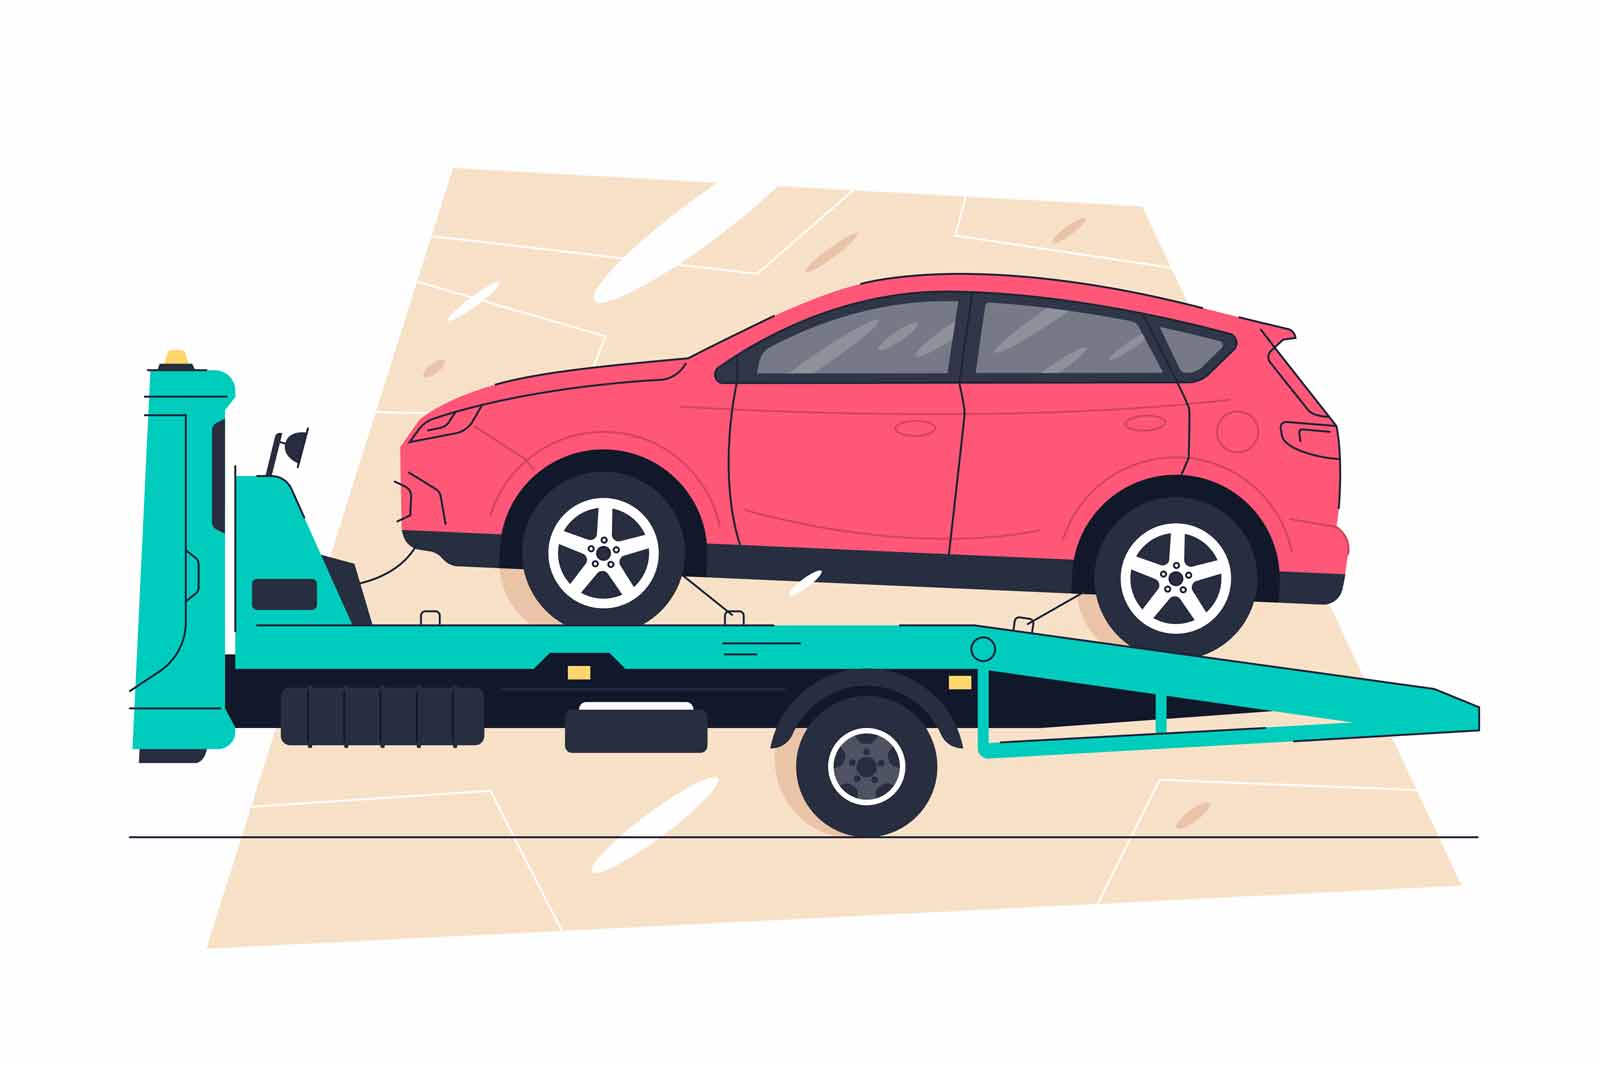 Car towing truck, evacuator or roadside assistance service vector illustration. Wrecker breakdown lorry loading and transportation flat concept